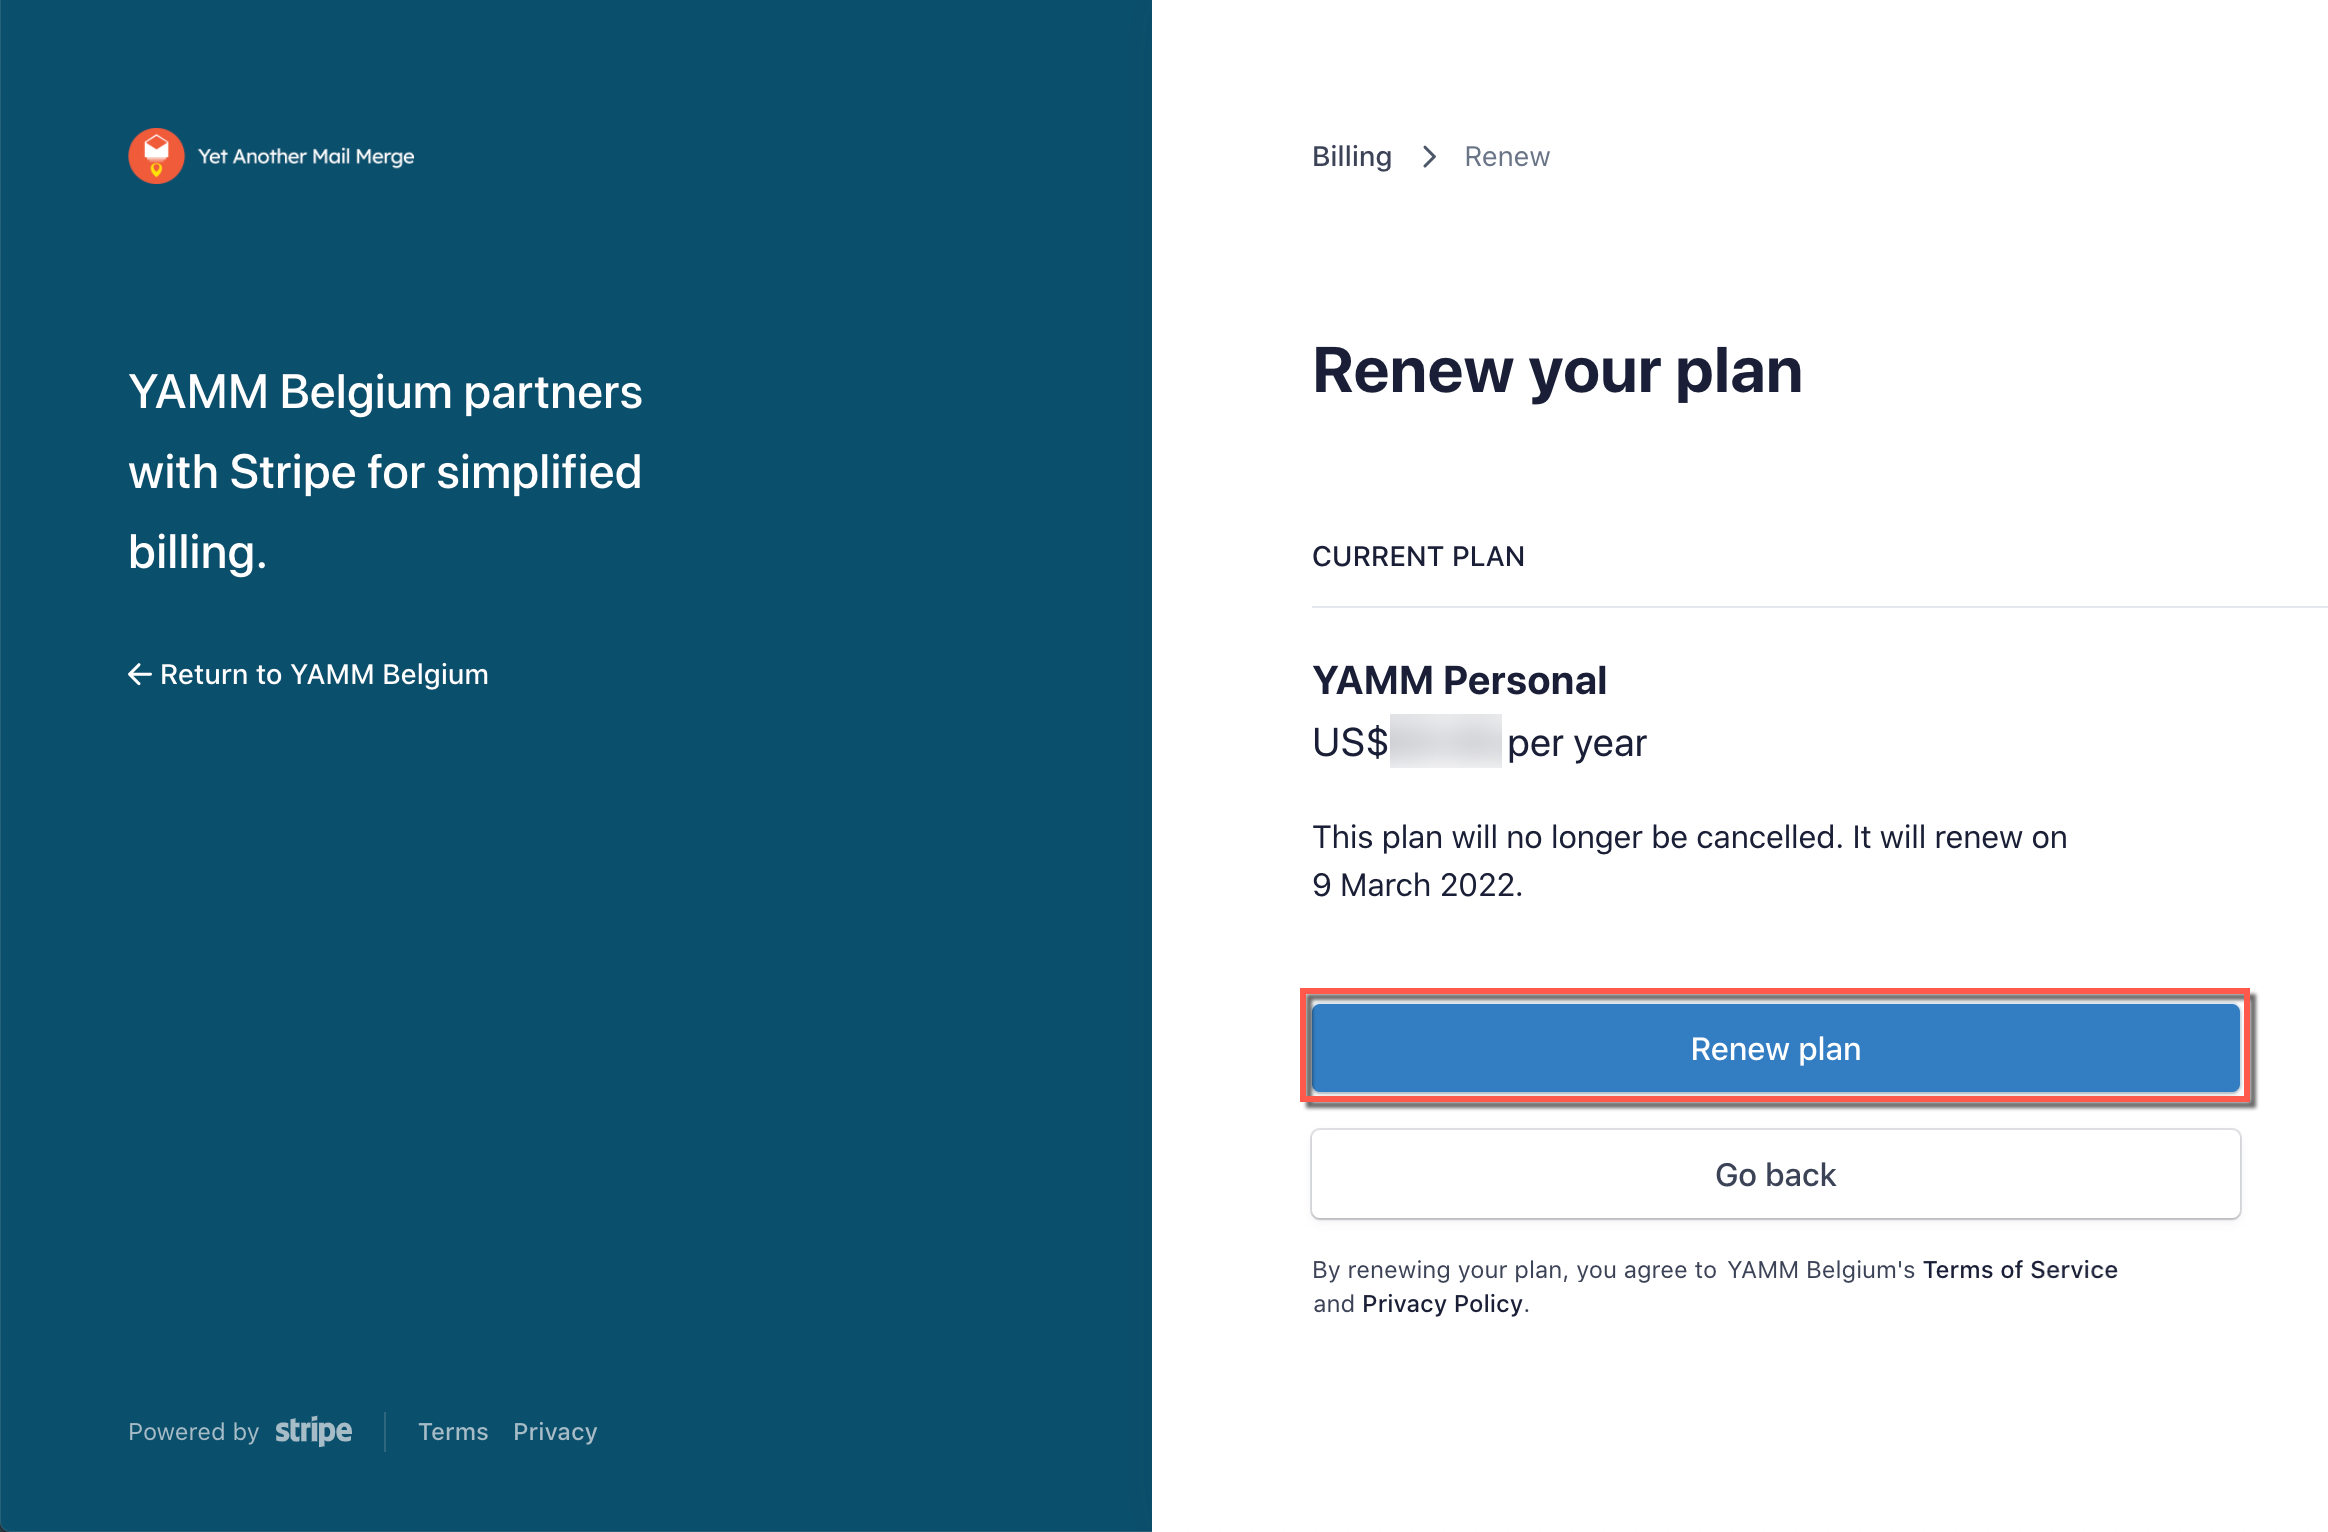 05-renew-subscr-confirm-renew-plan.png